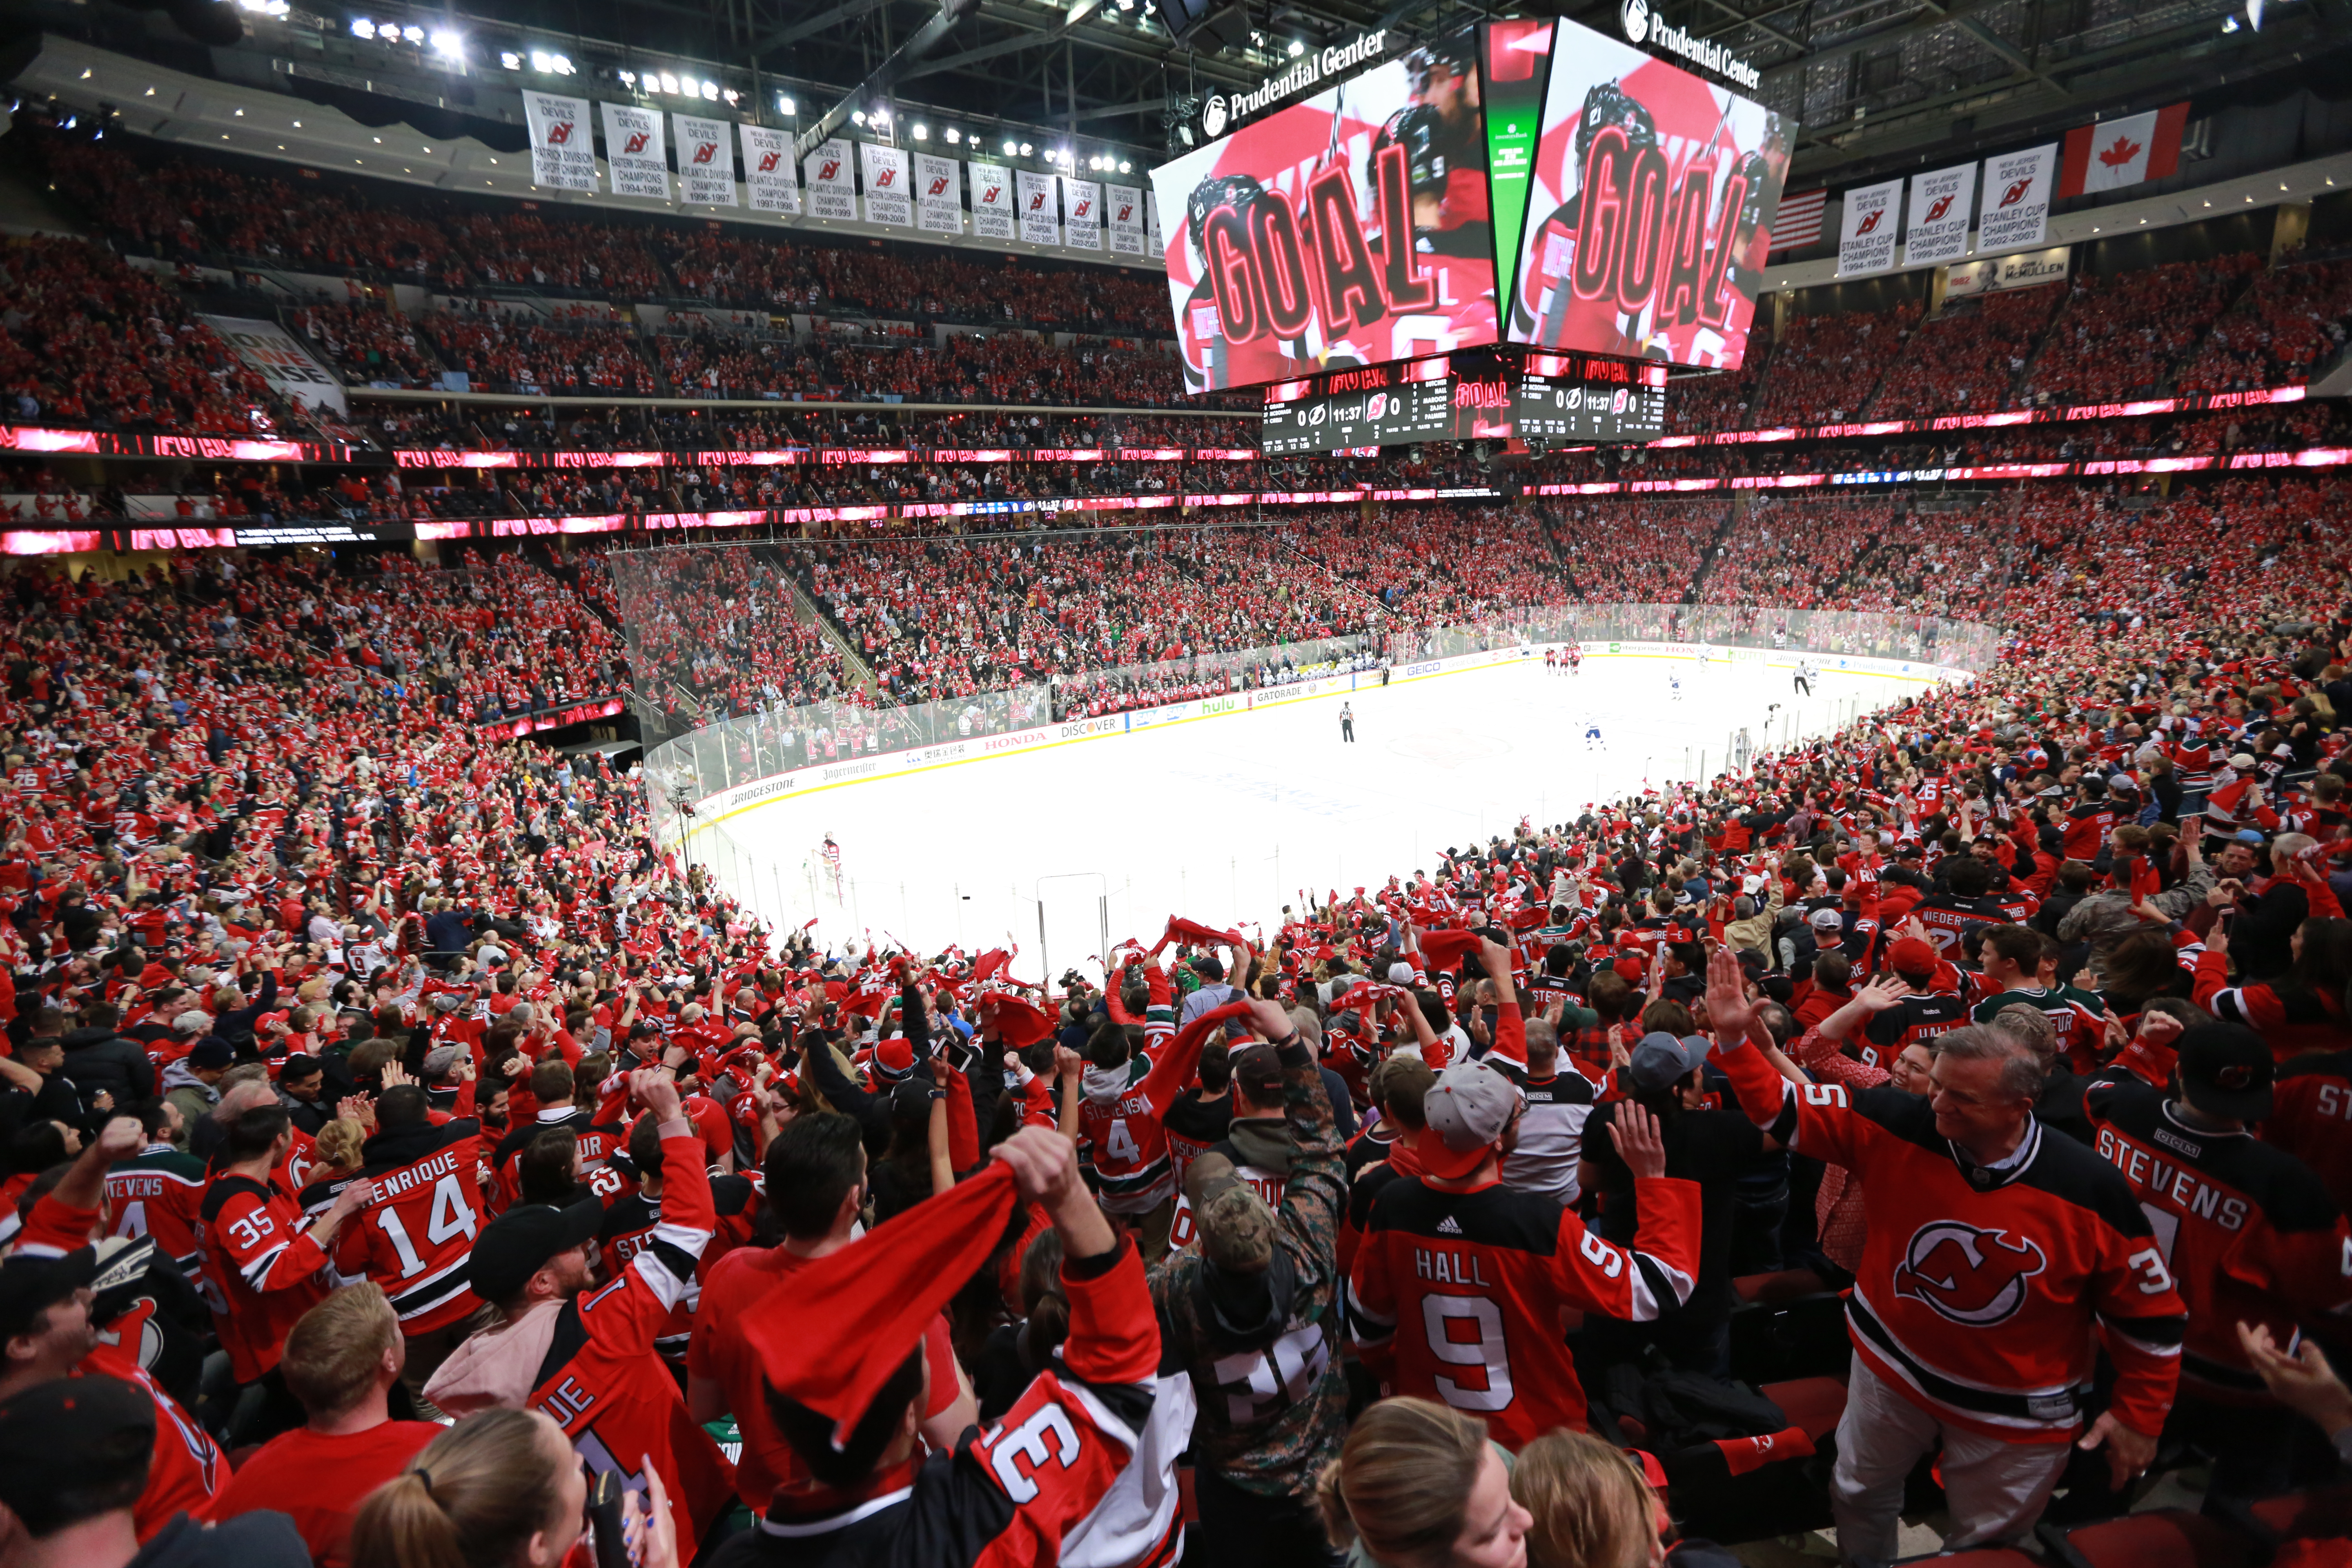 Prudential Center to Allow Limited Crowds Starting with March 2